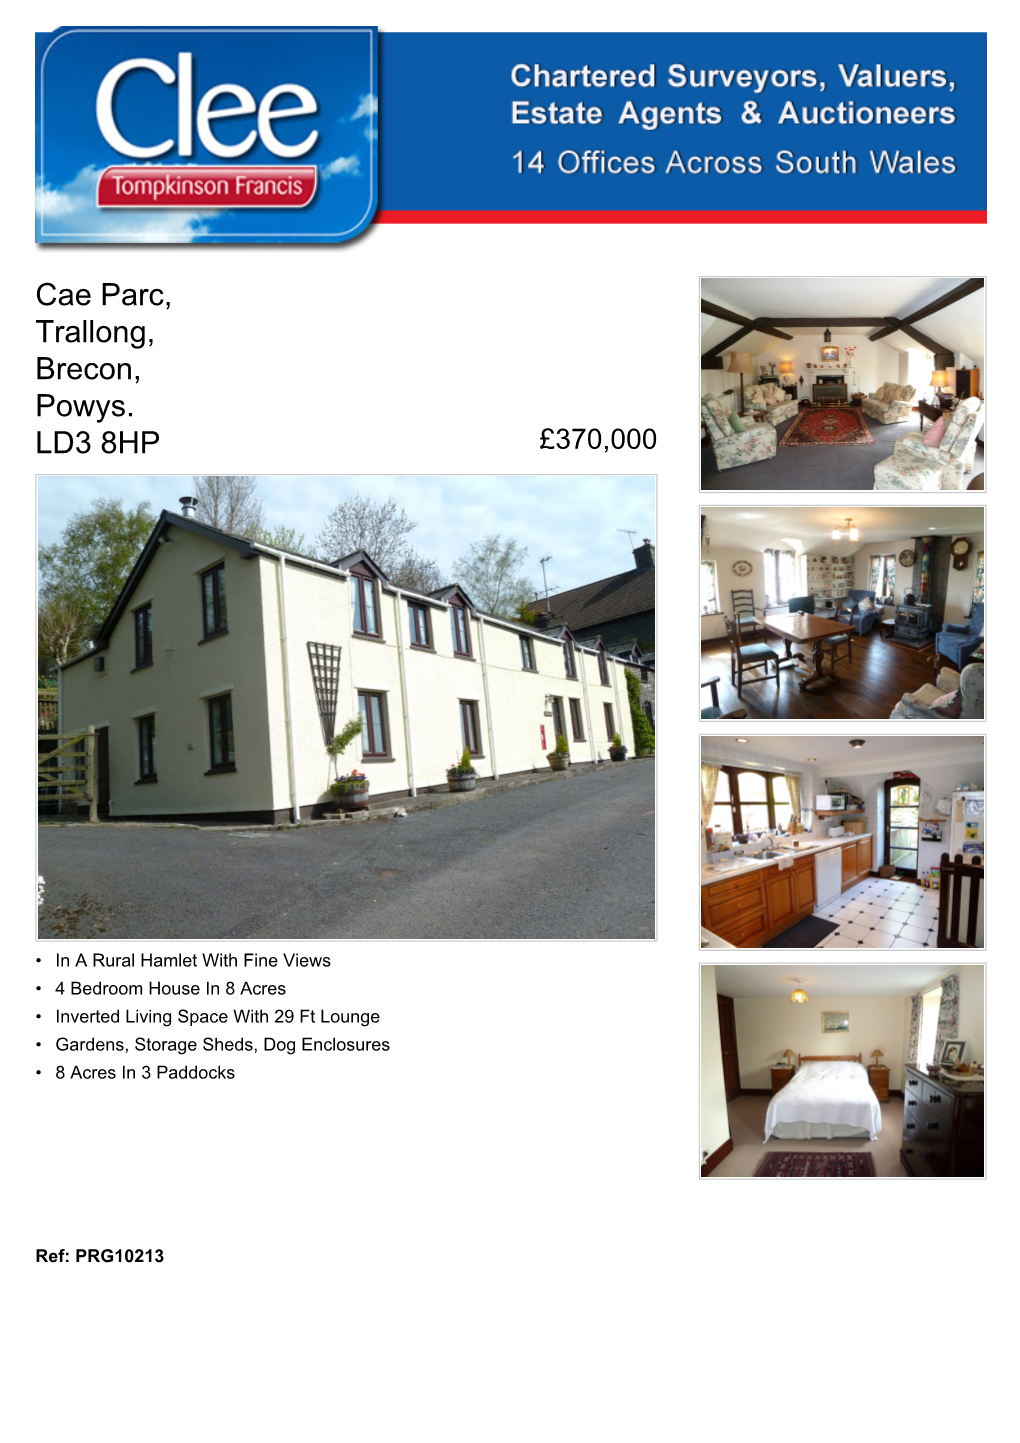 Cae Parc, Trallong, Brecon, Powys. LD3 8HP £370,000